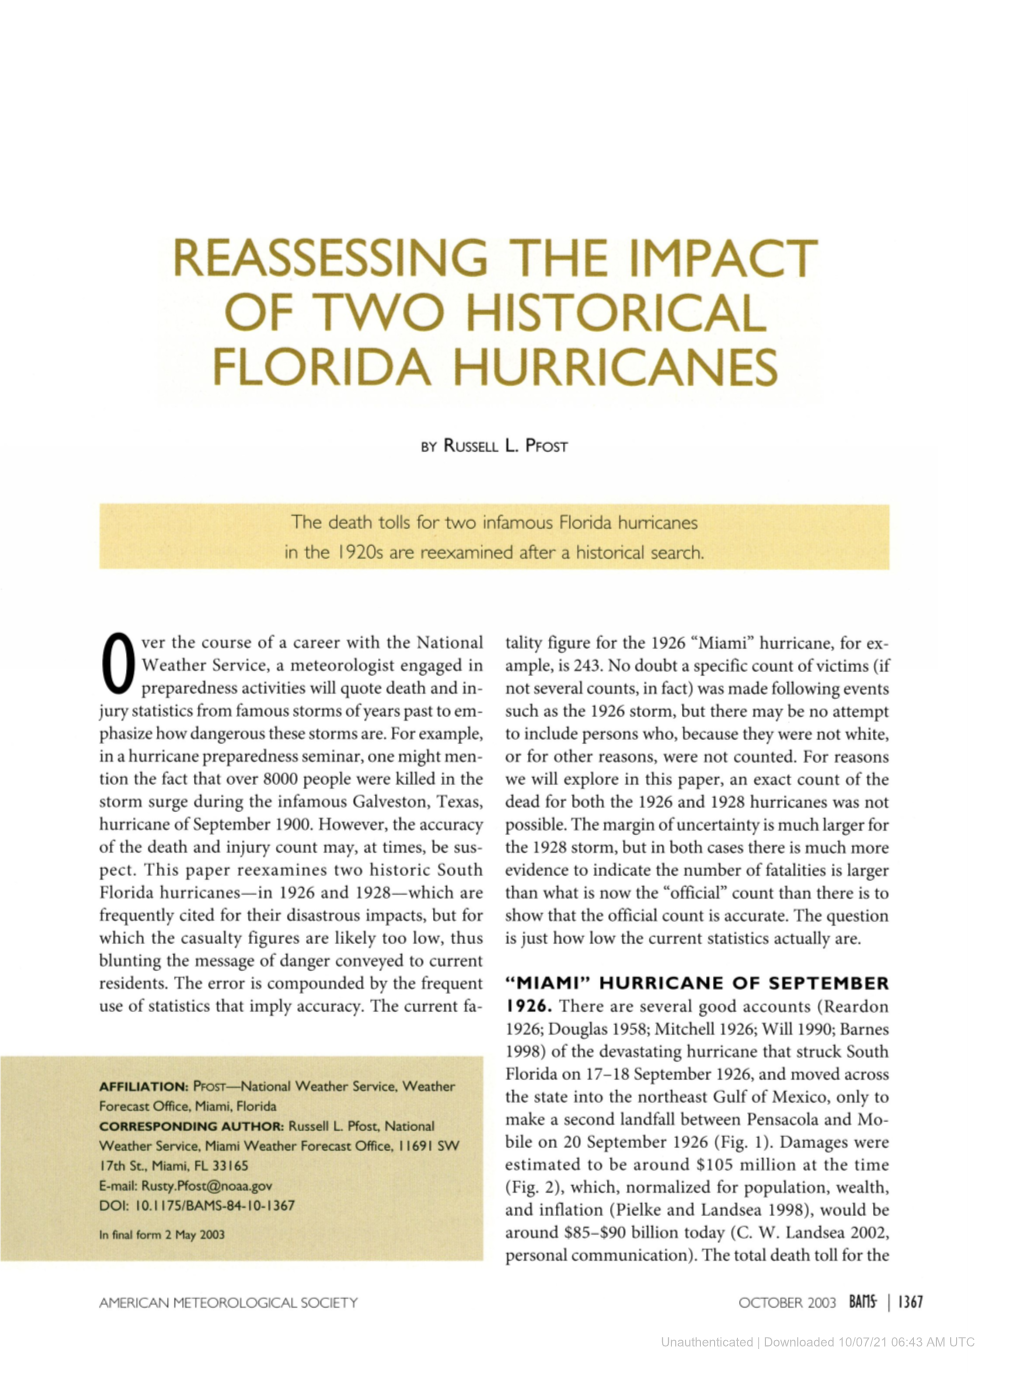 Reassessing the Impact of Two Historical Florida Hurricanes